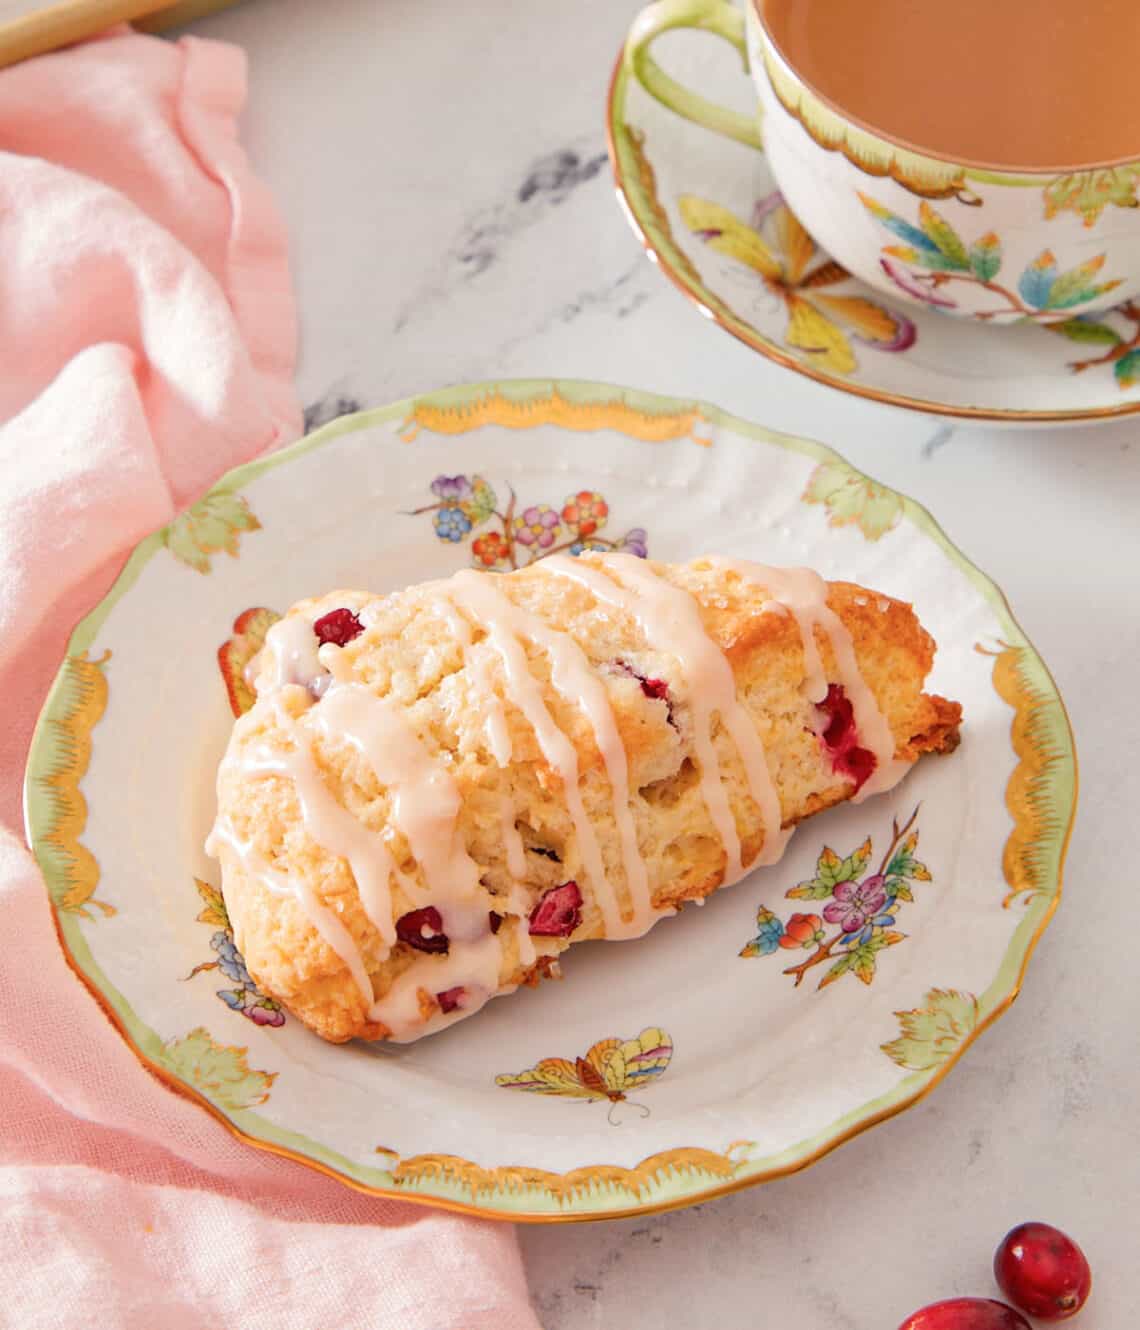 A plate with a cranberry orange scone with a drizzle of glaze over top with a mug of coffee in the back.